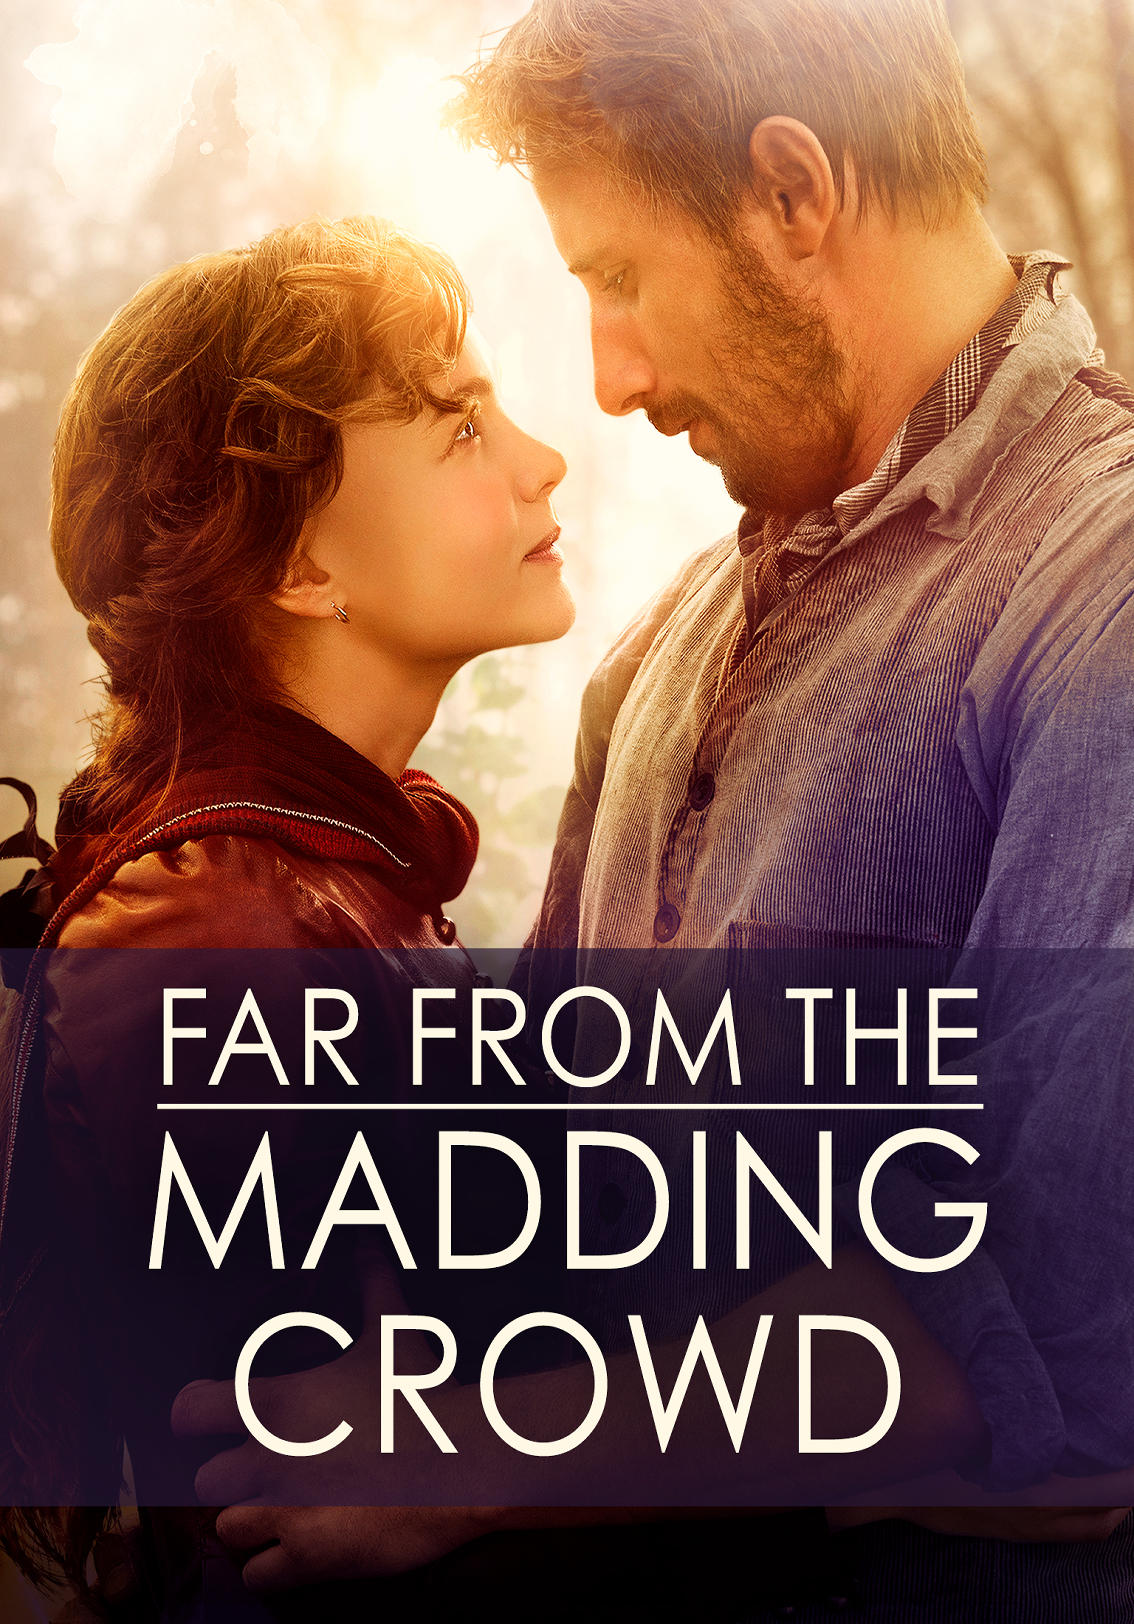 from the madding crowd book